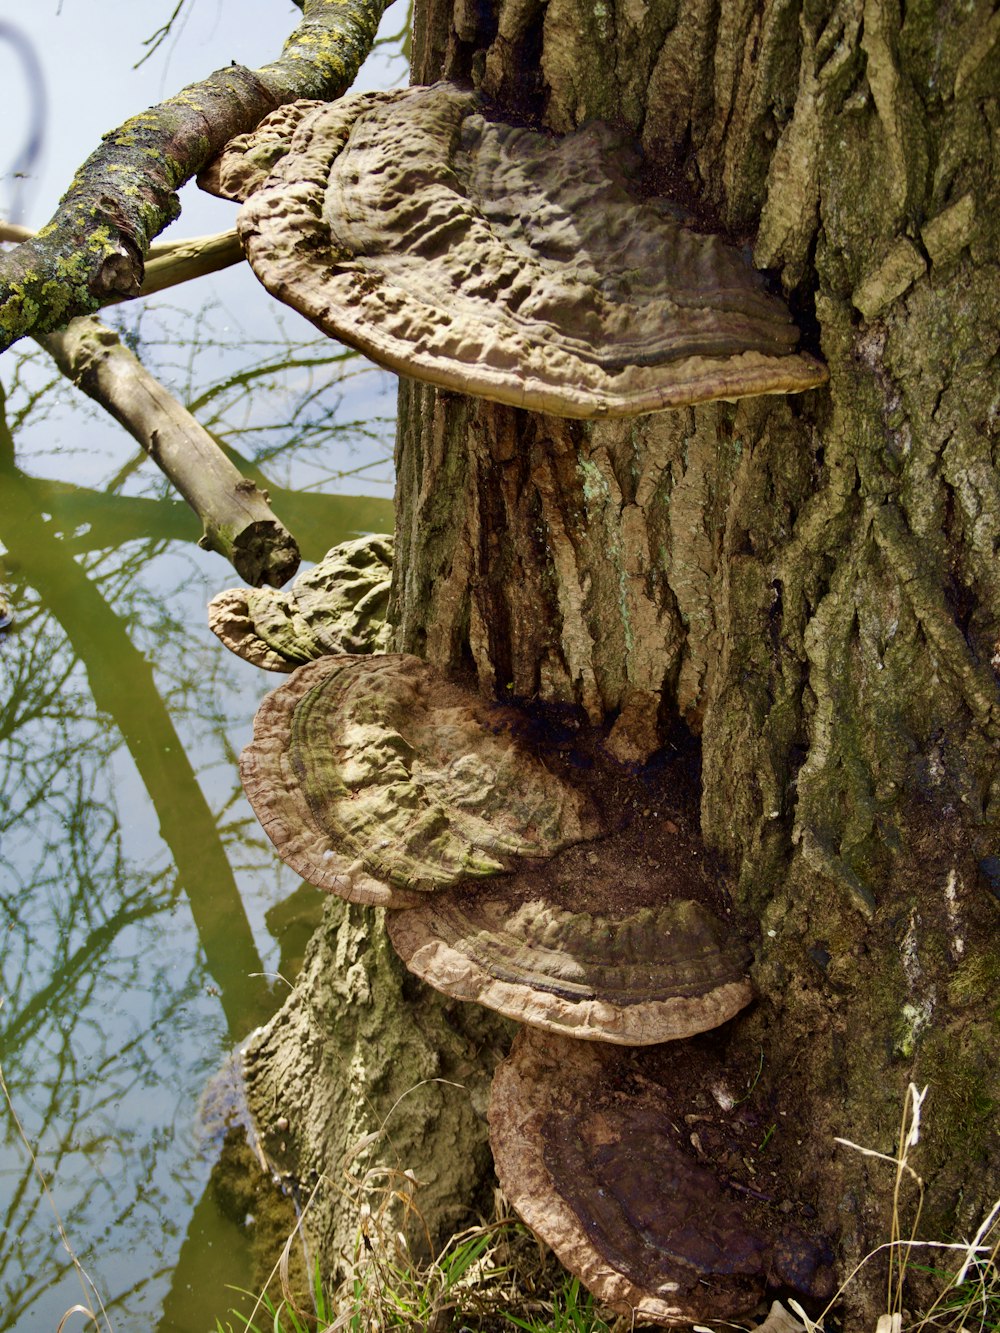 a group of mushrooms growing on a tree next to a body of water